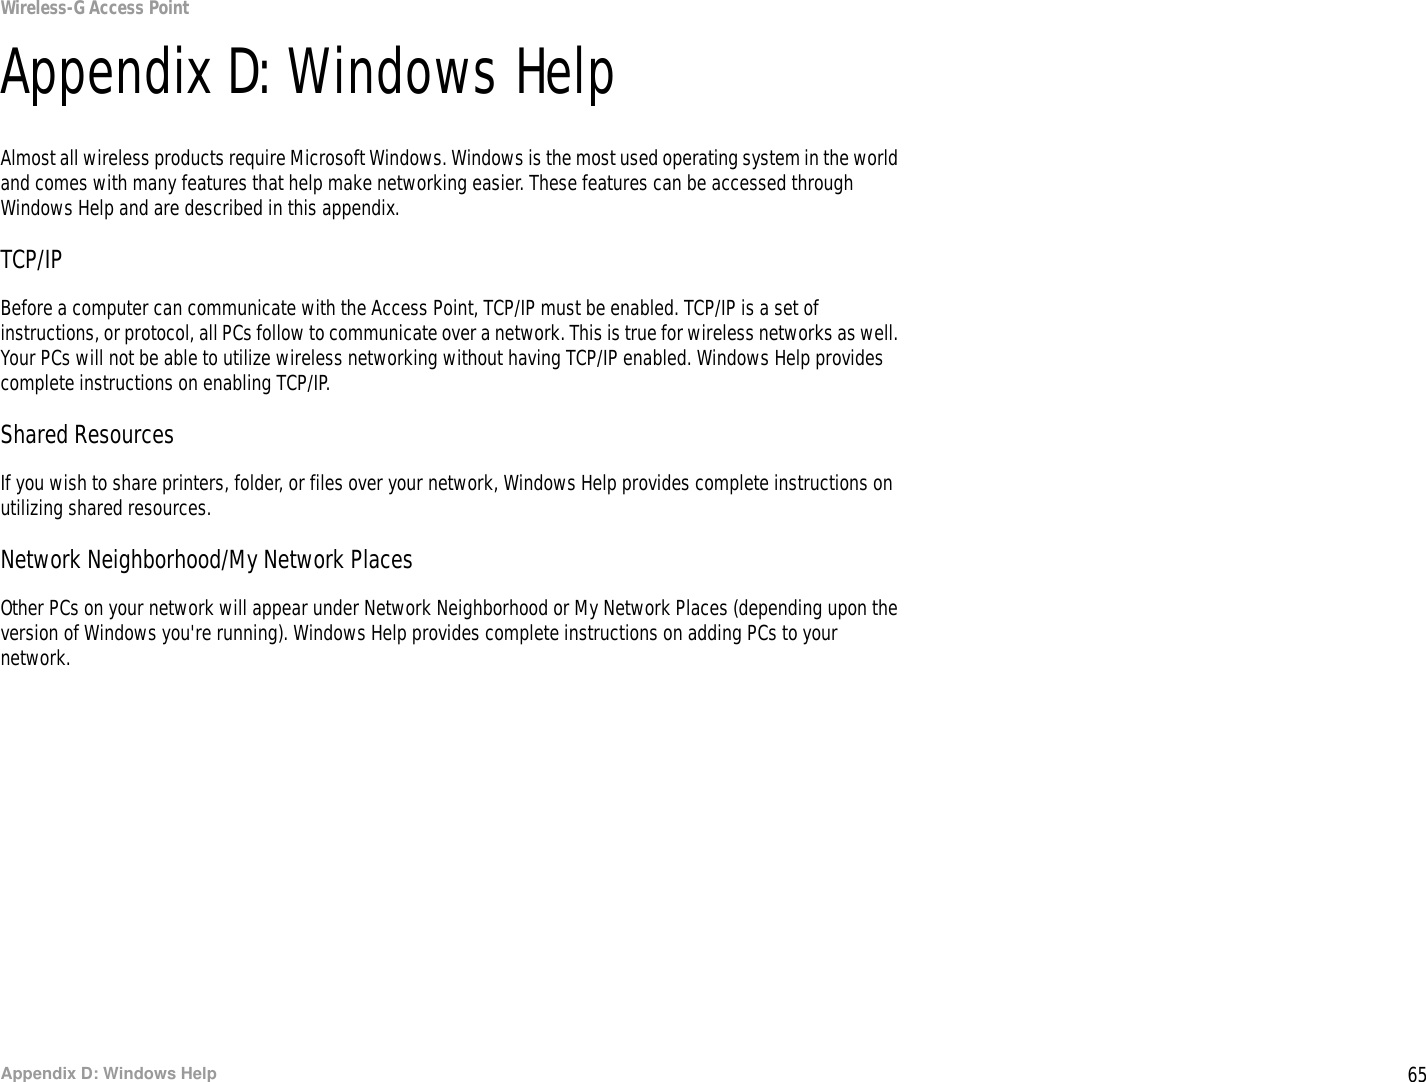 65Appendix D: Windows HelpWireless-G Access PointAppendix D: Windows HelpAlmost all wireless products require Microsoft Windows. Windows is the most used operating system in the world and comes with many features that help make networking easier. These features can be accessed through Windows Help and are described in this appendix.TCP/IPBefore a computer can communicate with the Access Point, TCP/IP must be enabled. TCP/IP is a set of instructions, or protocol, all PCs follow to communicate over a network. This is true for wireless networks as well. Your PCs will not be able to utilize wireless networking without having TCP/IP enabled. Windows Help provides complete instructions on enabling TCP/IP.Shared ResourcesIf you wish to share printers, folder, or files over your network, Windows Help provides complete instructions on utilizing shared resources.Network Neighborhood/My Network PlacesOther PCs on your network will appear under Network Neighborhood or My Network Places (depending upon the version of Windows you&apos;re running). Windows Help provides complete instructions on adding PCs to your network.